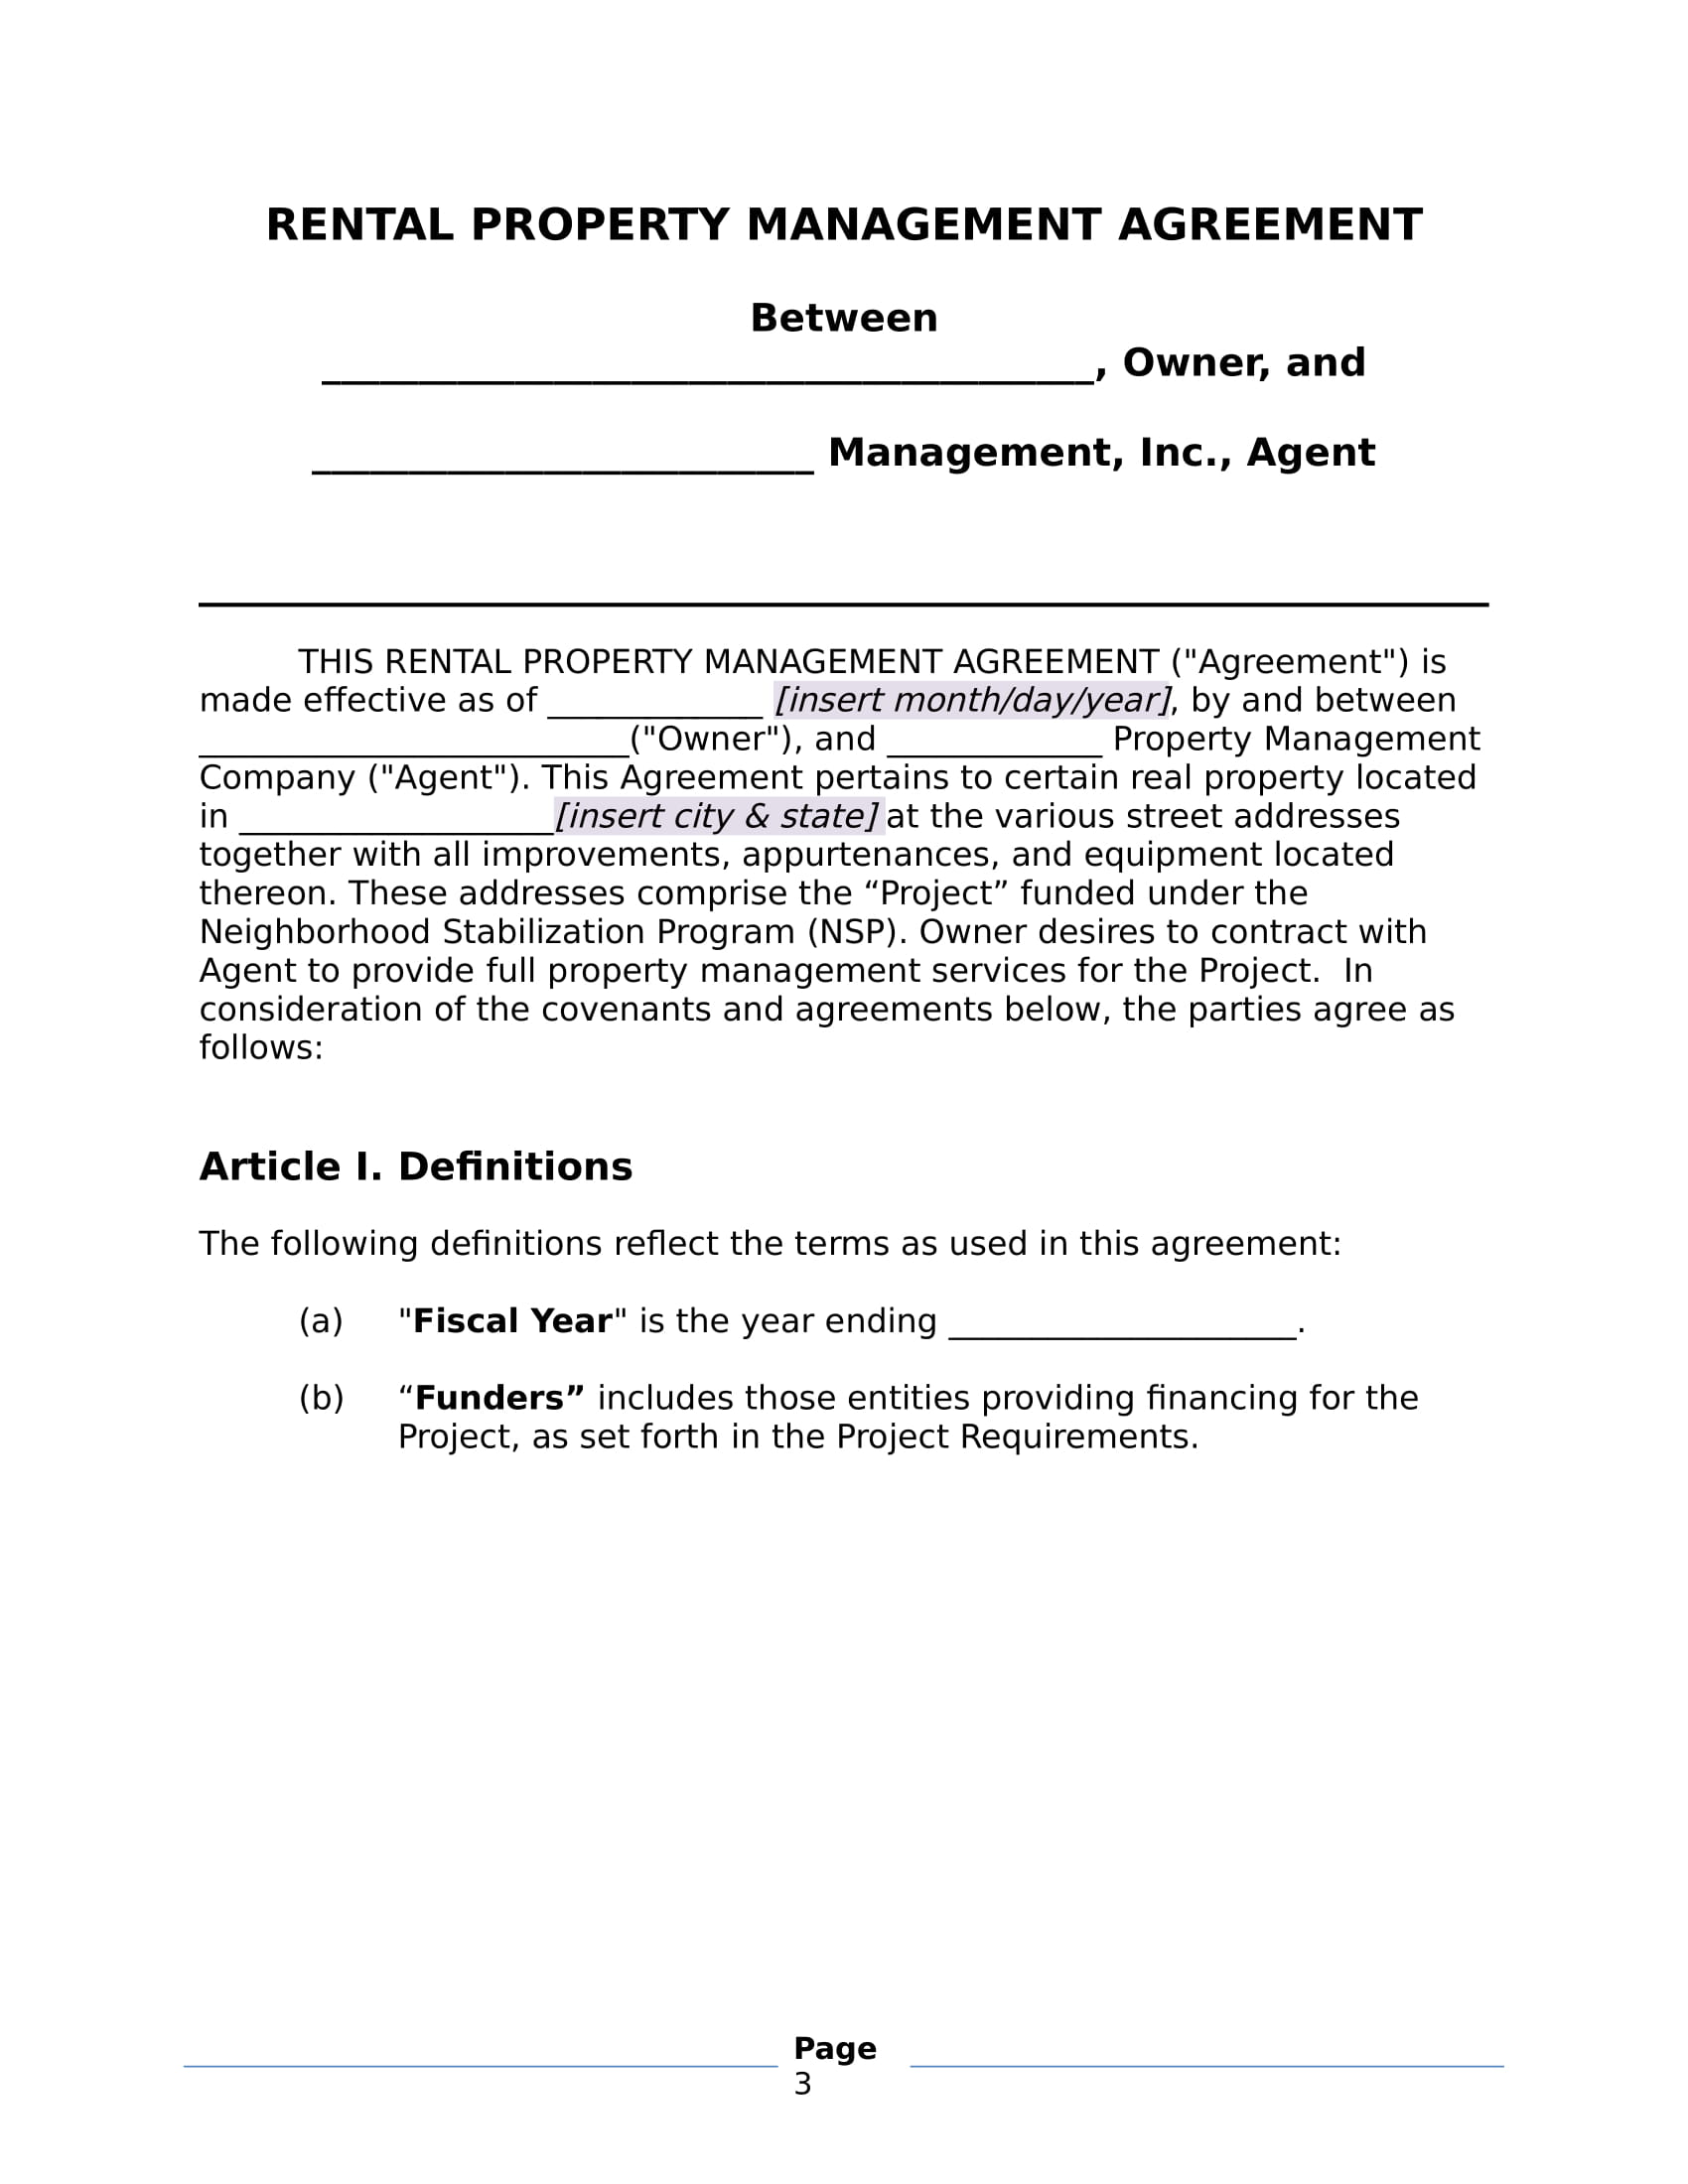 rental property management agreement contract in doc 03